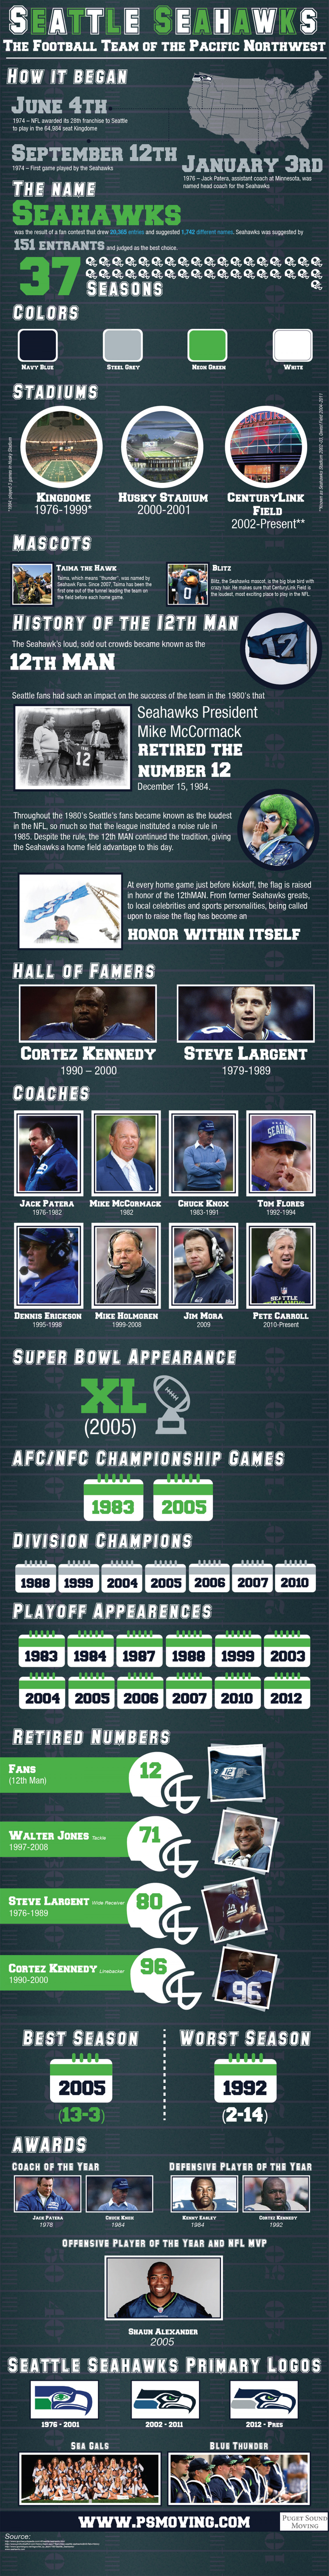 Seattle Seahawks Infographic